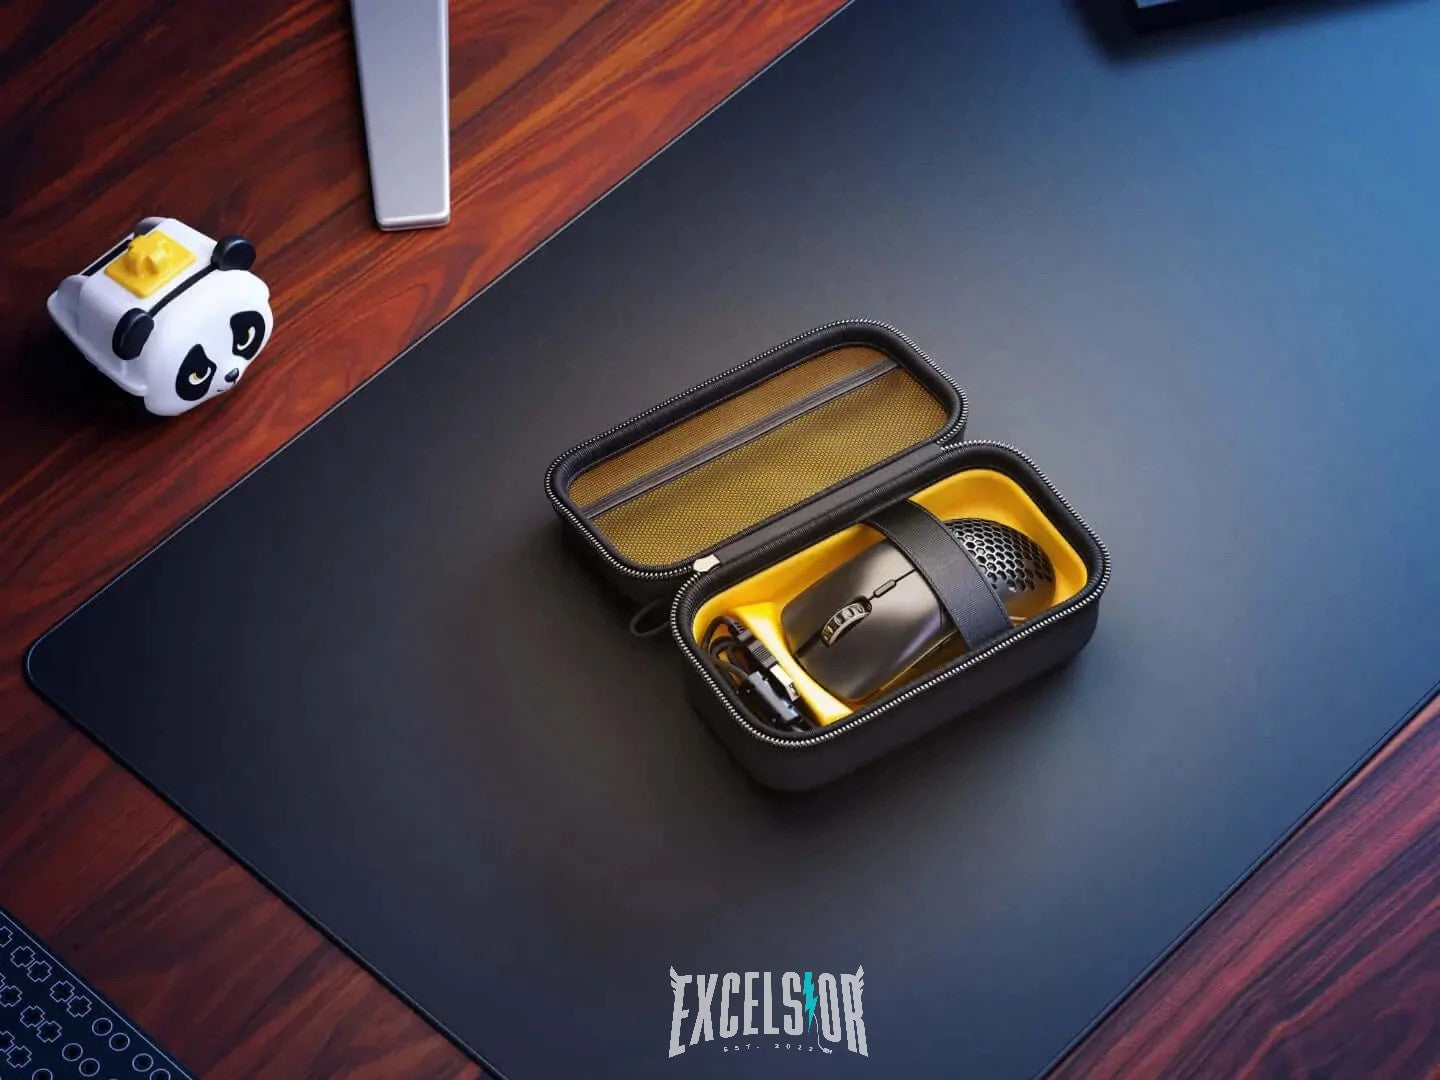 Glorious Mouse Case